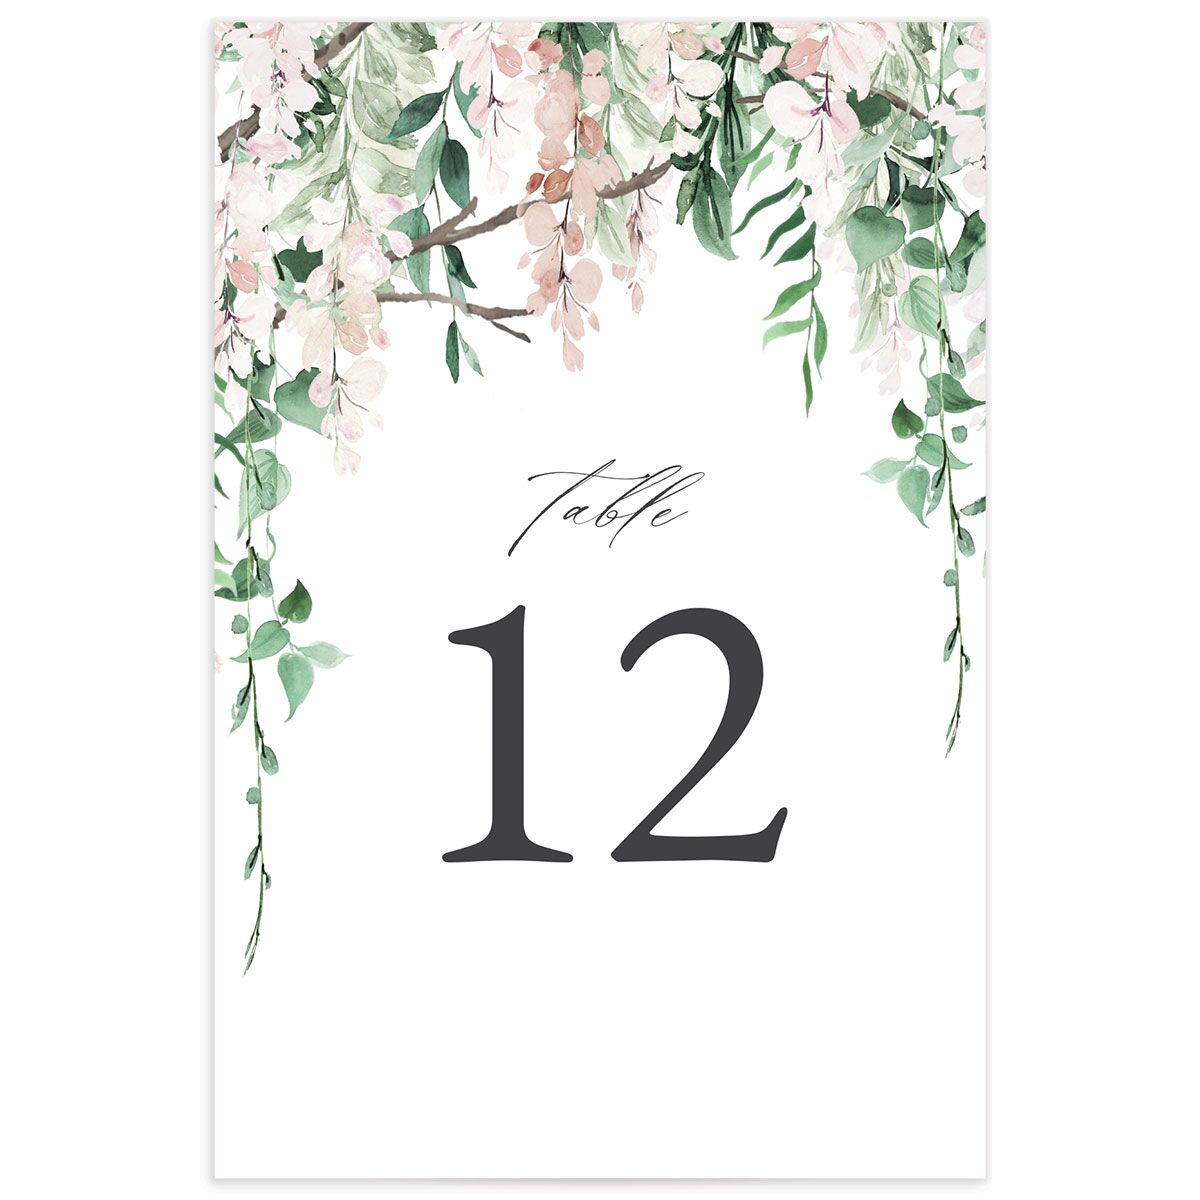 Enchanting Wisteria Table Numbers